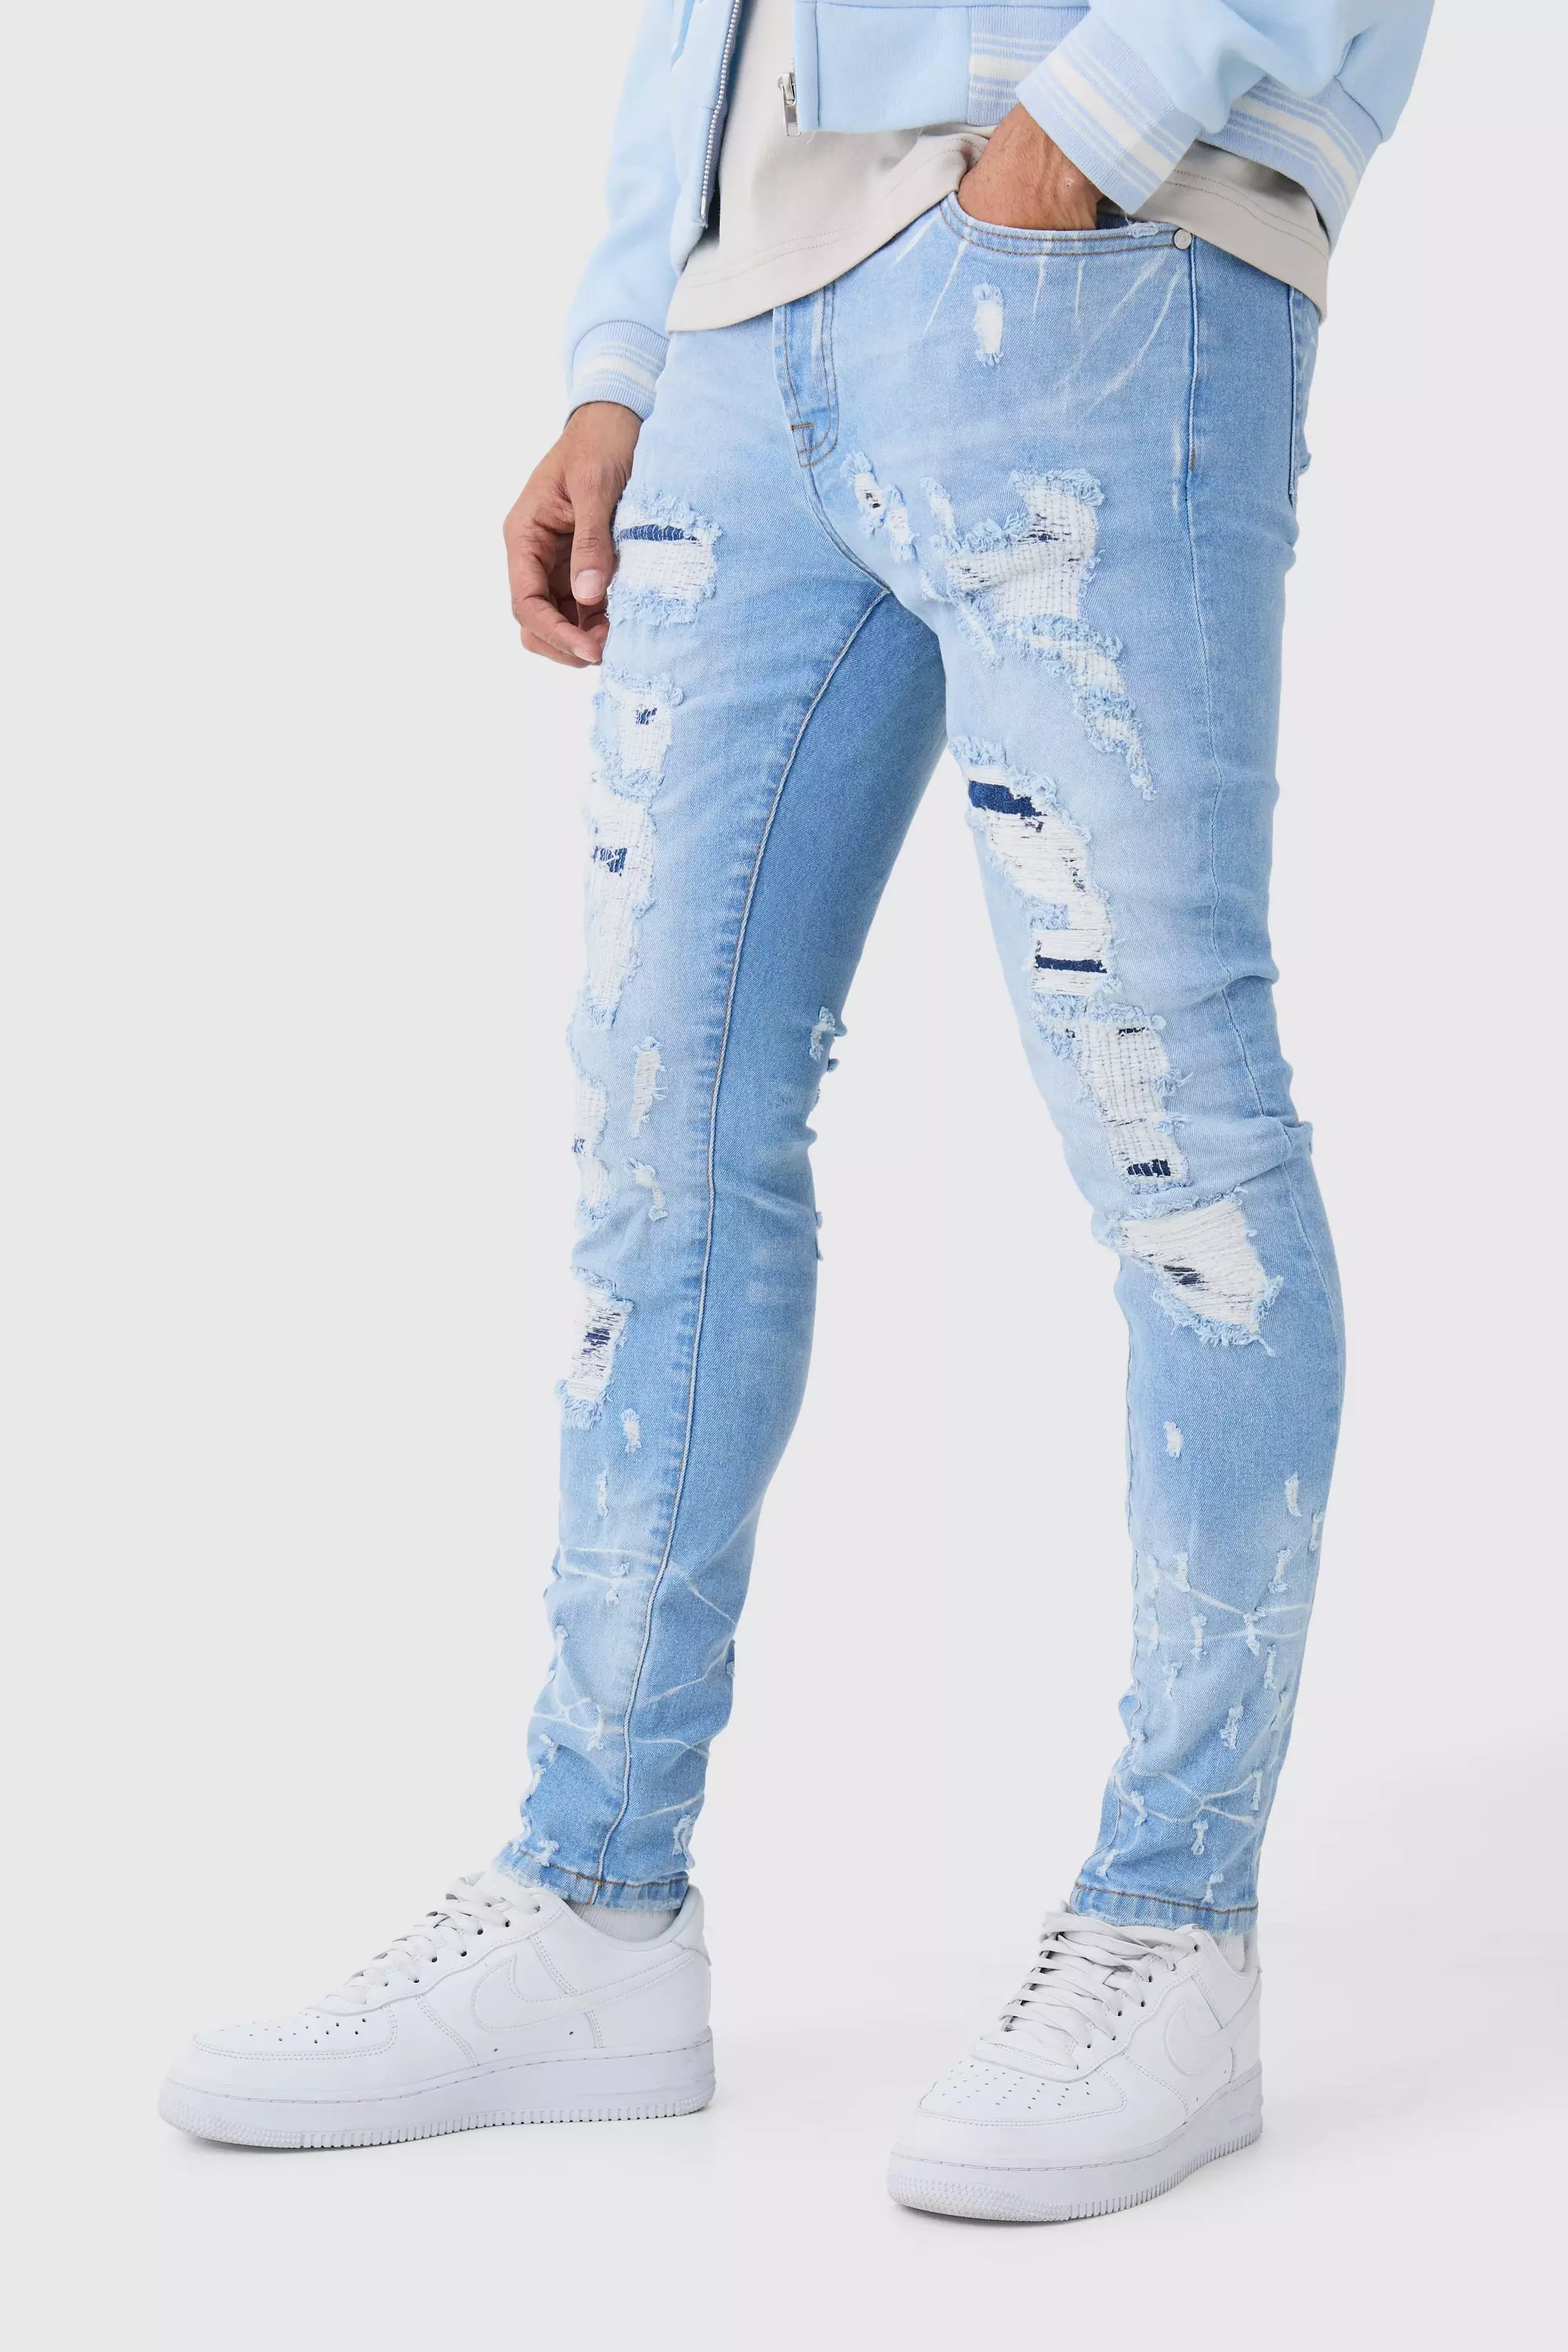 Men's Blue Ripped Jeans, Blue Distressed Jeans